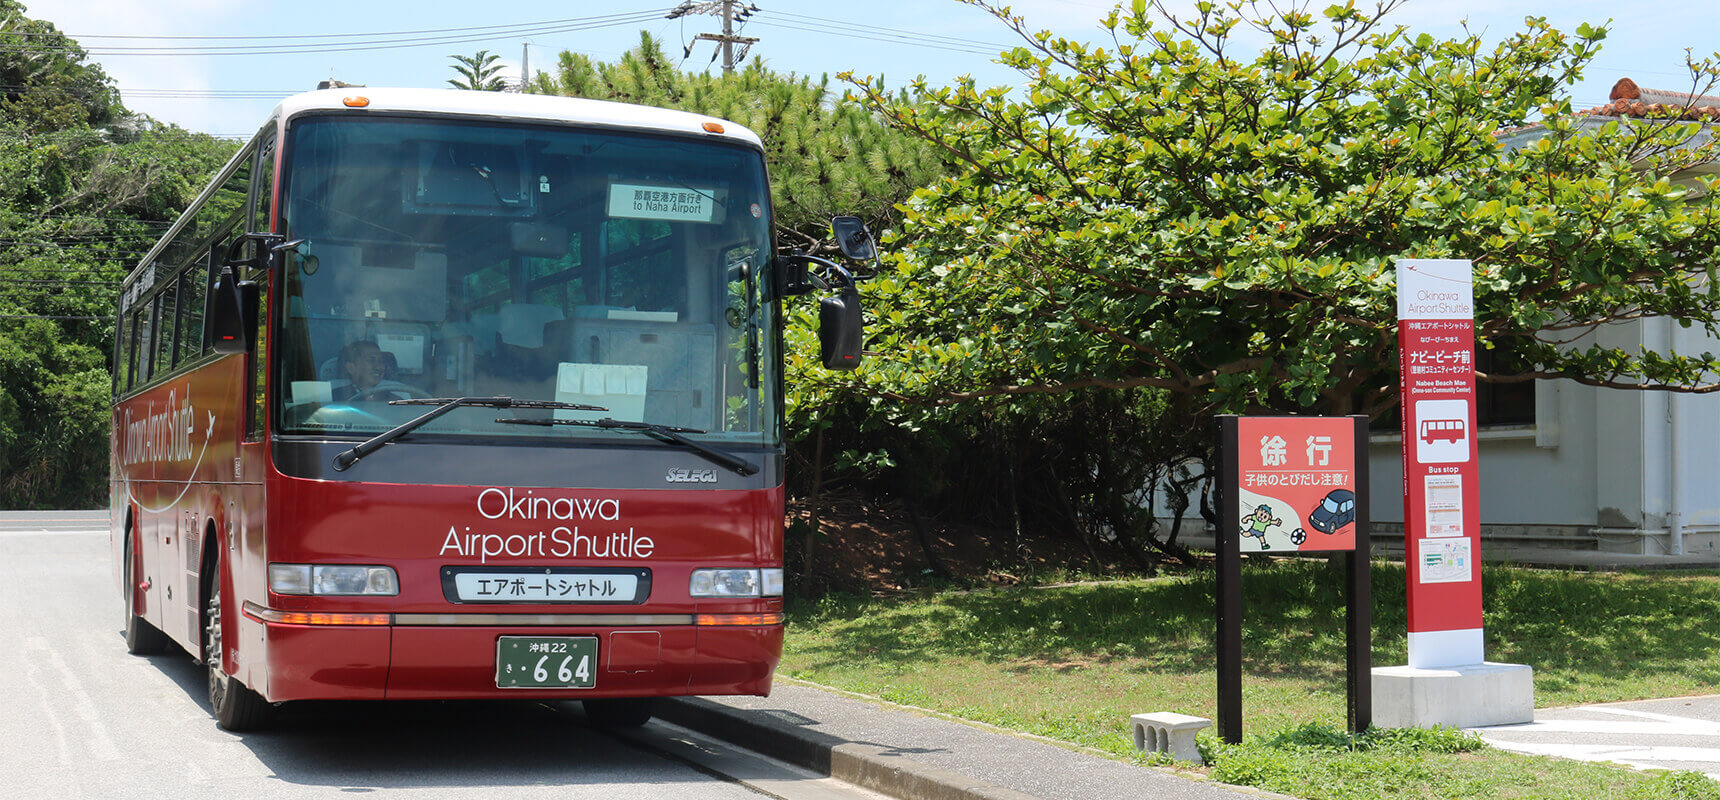 Directly to Okinawa Churaumi Aquarium at the Okinawa Airport Shuttle! What is the charm of a bus trip? !